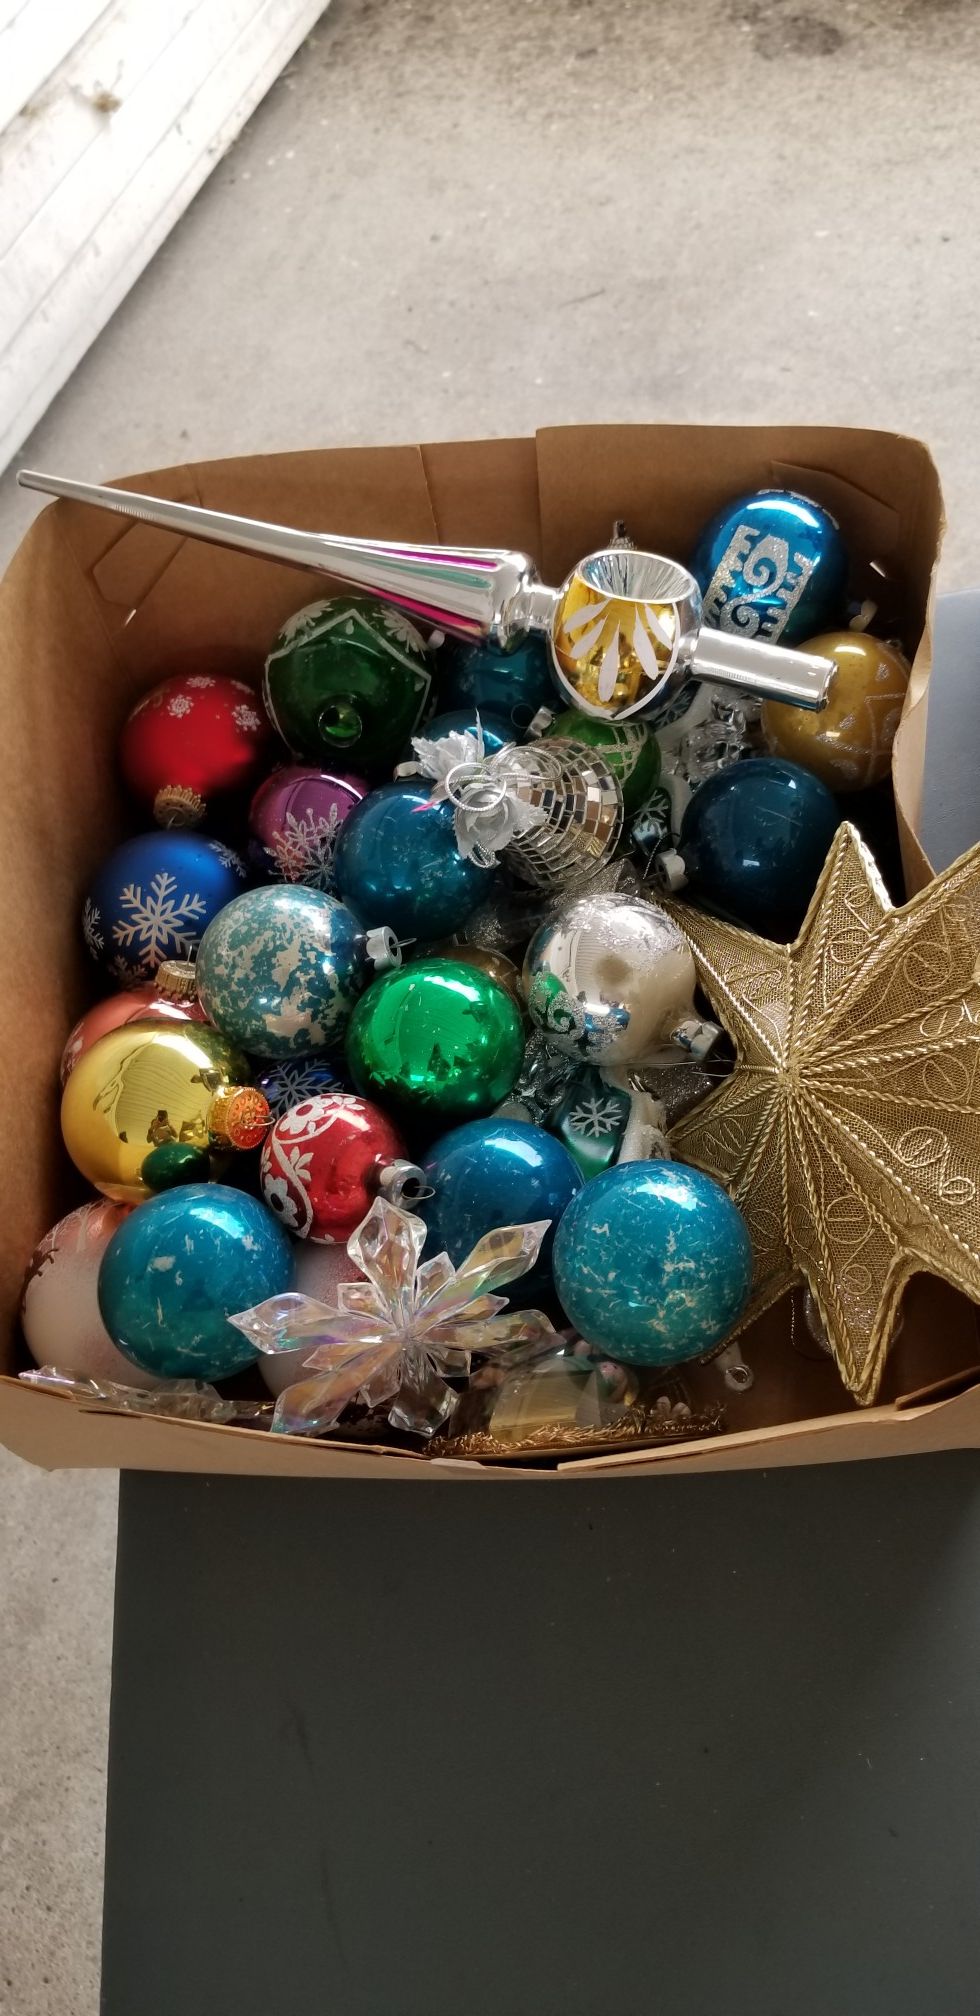 Vintage Christmas ornaments and decor. Asking $80.for all.